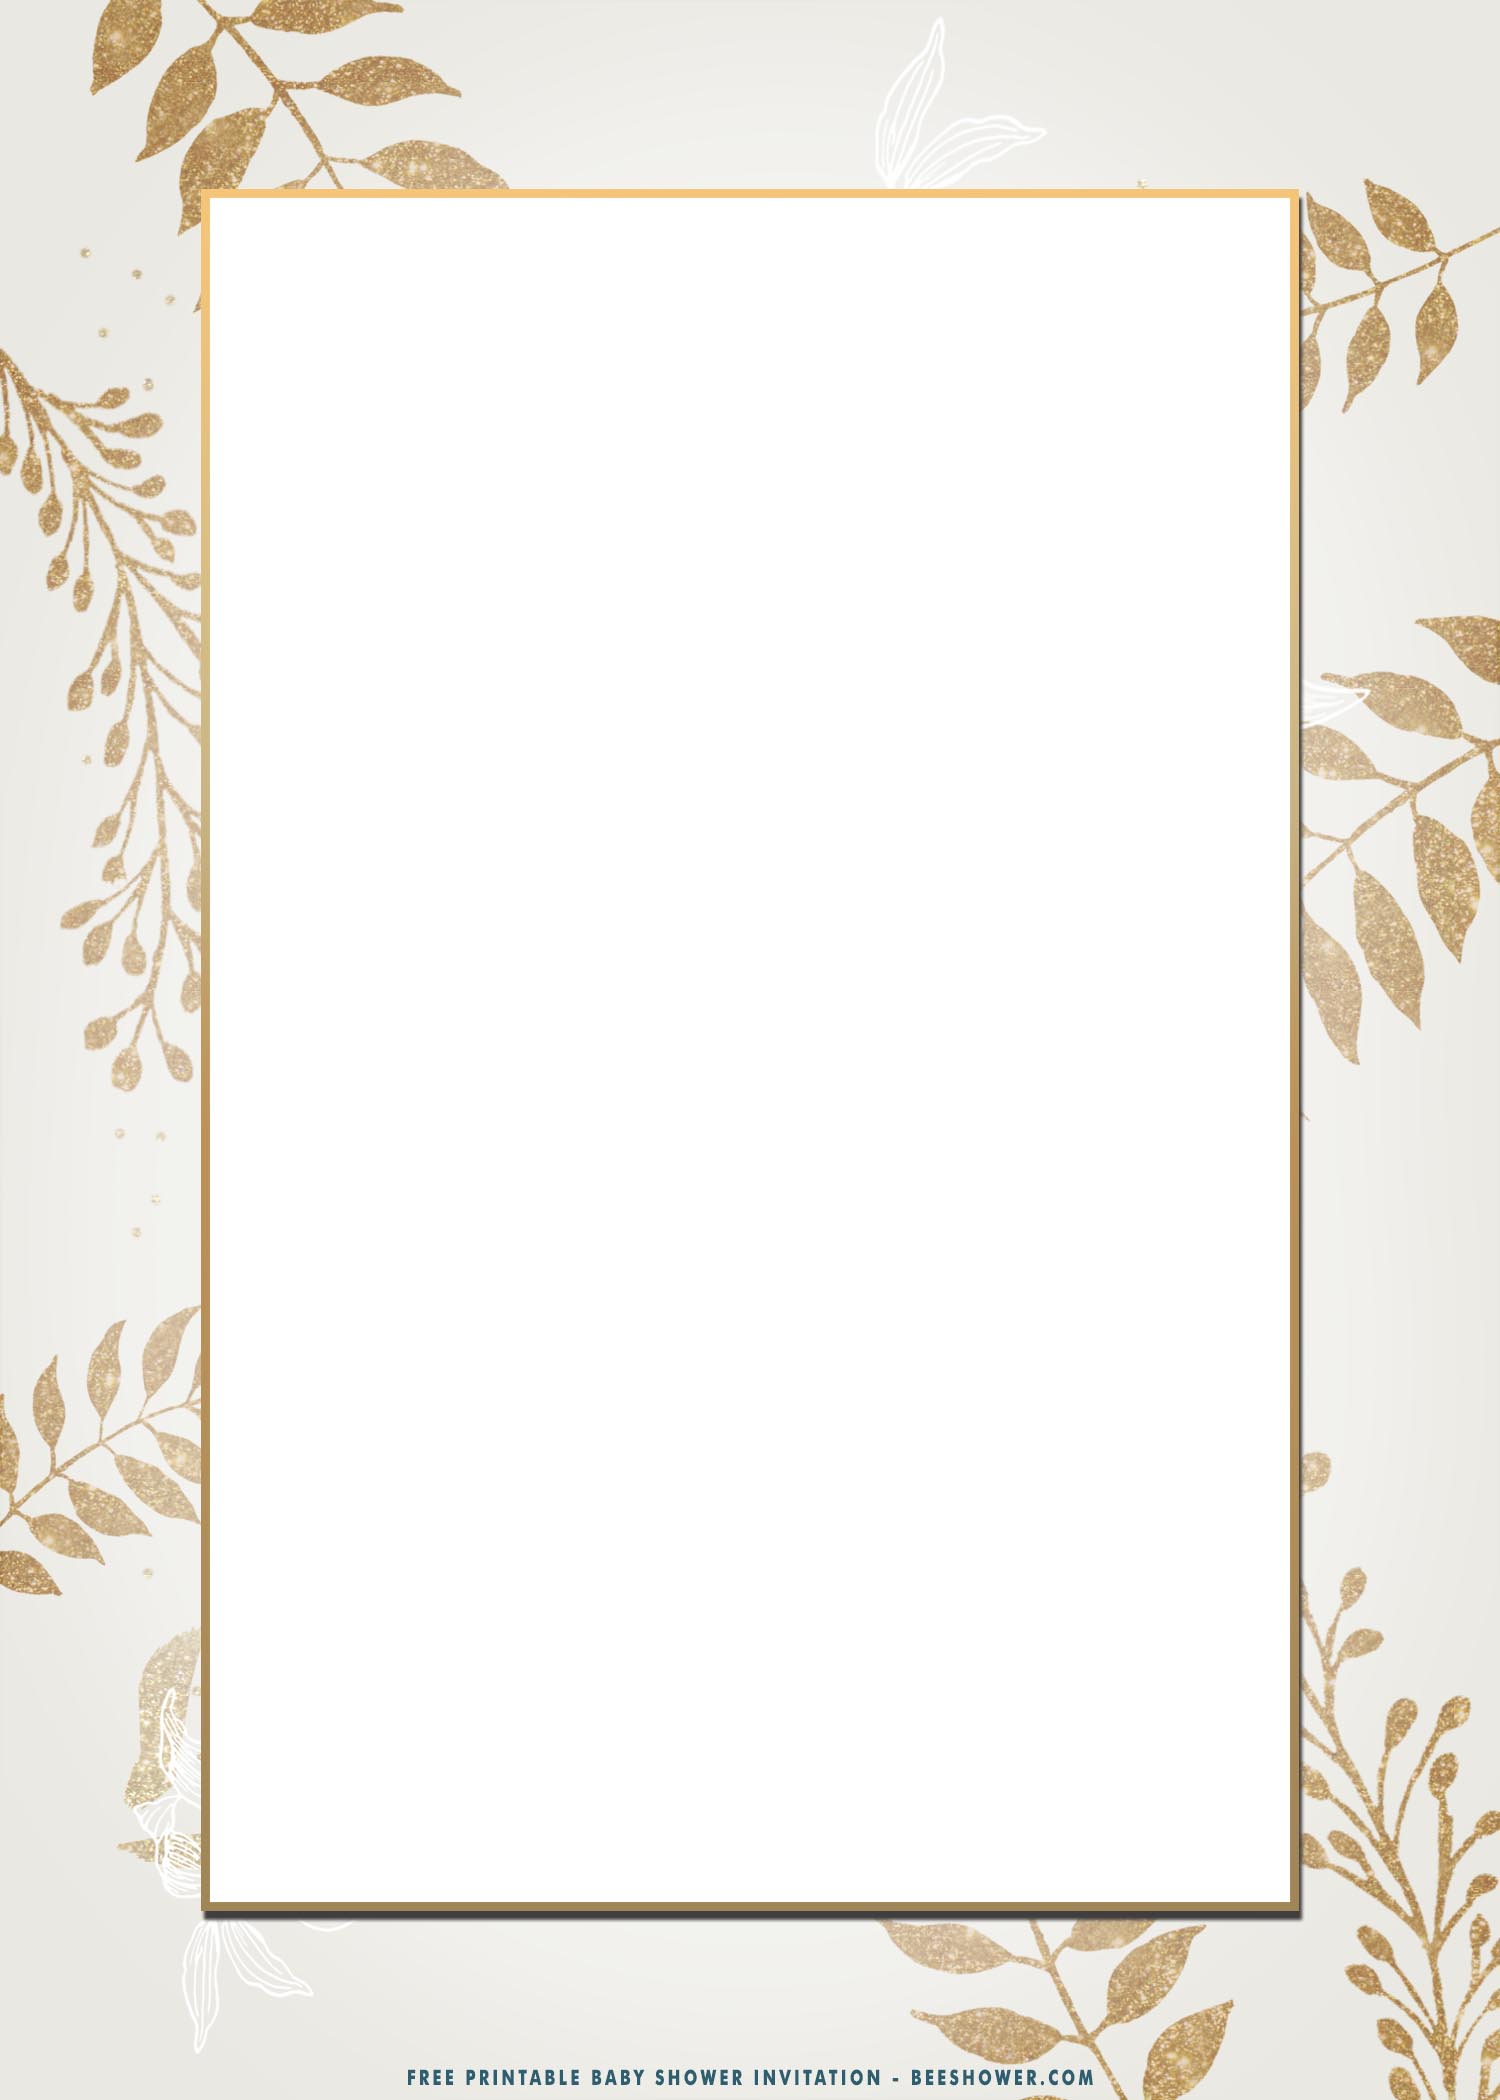 Free Word Frame Templates Free Printable School Borders Templates Frame Clipart